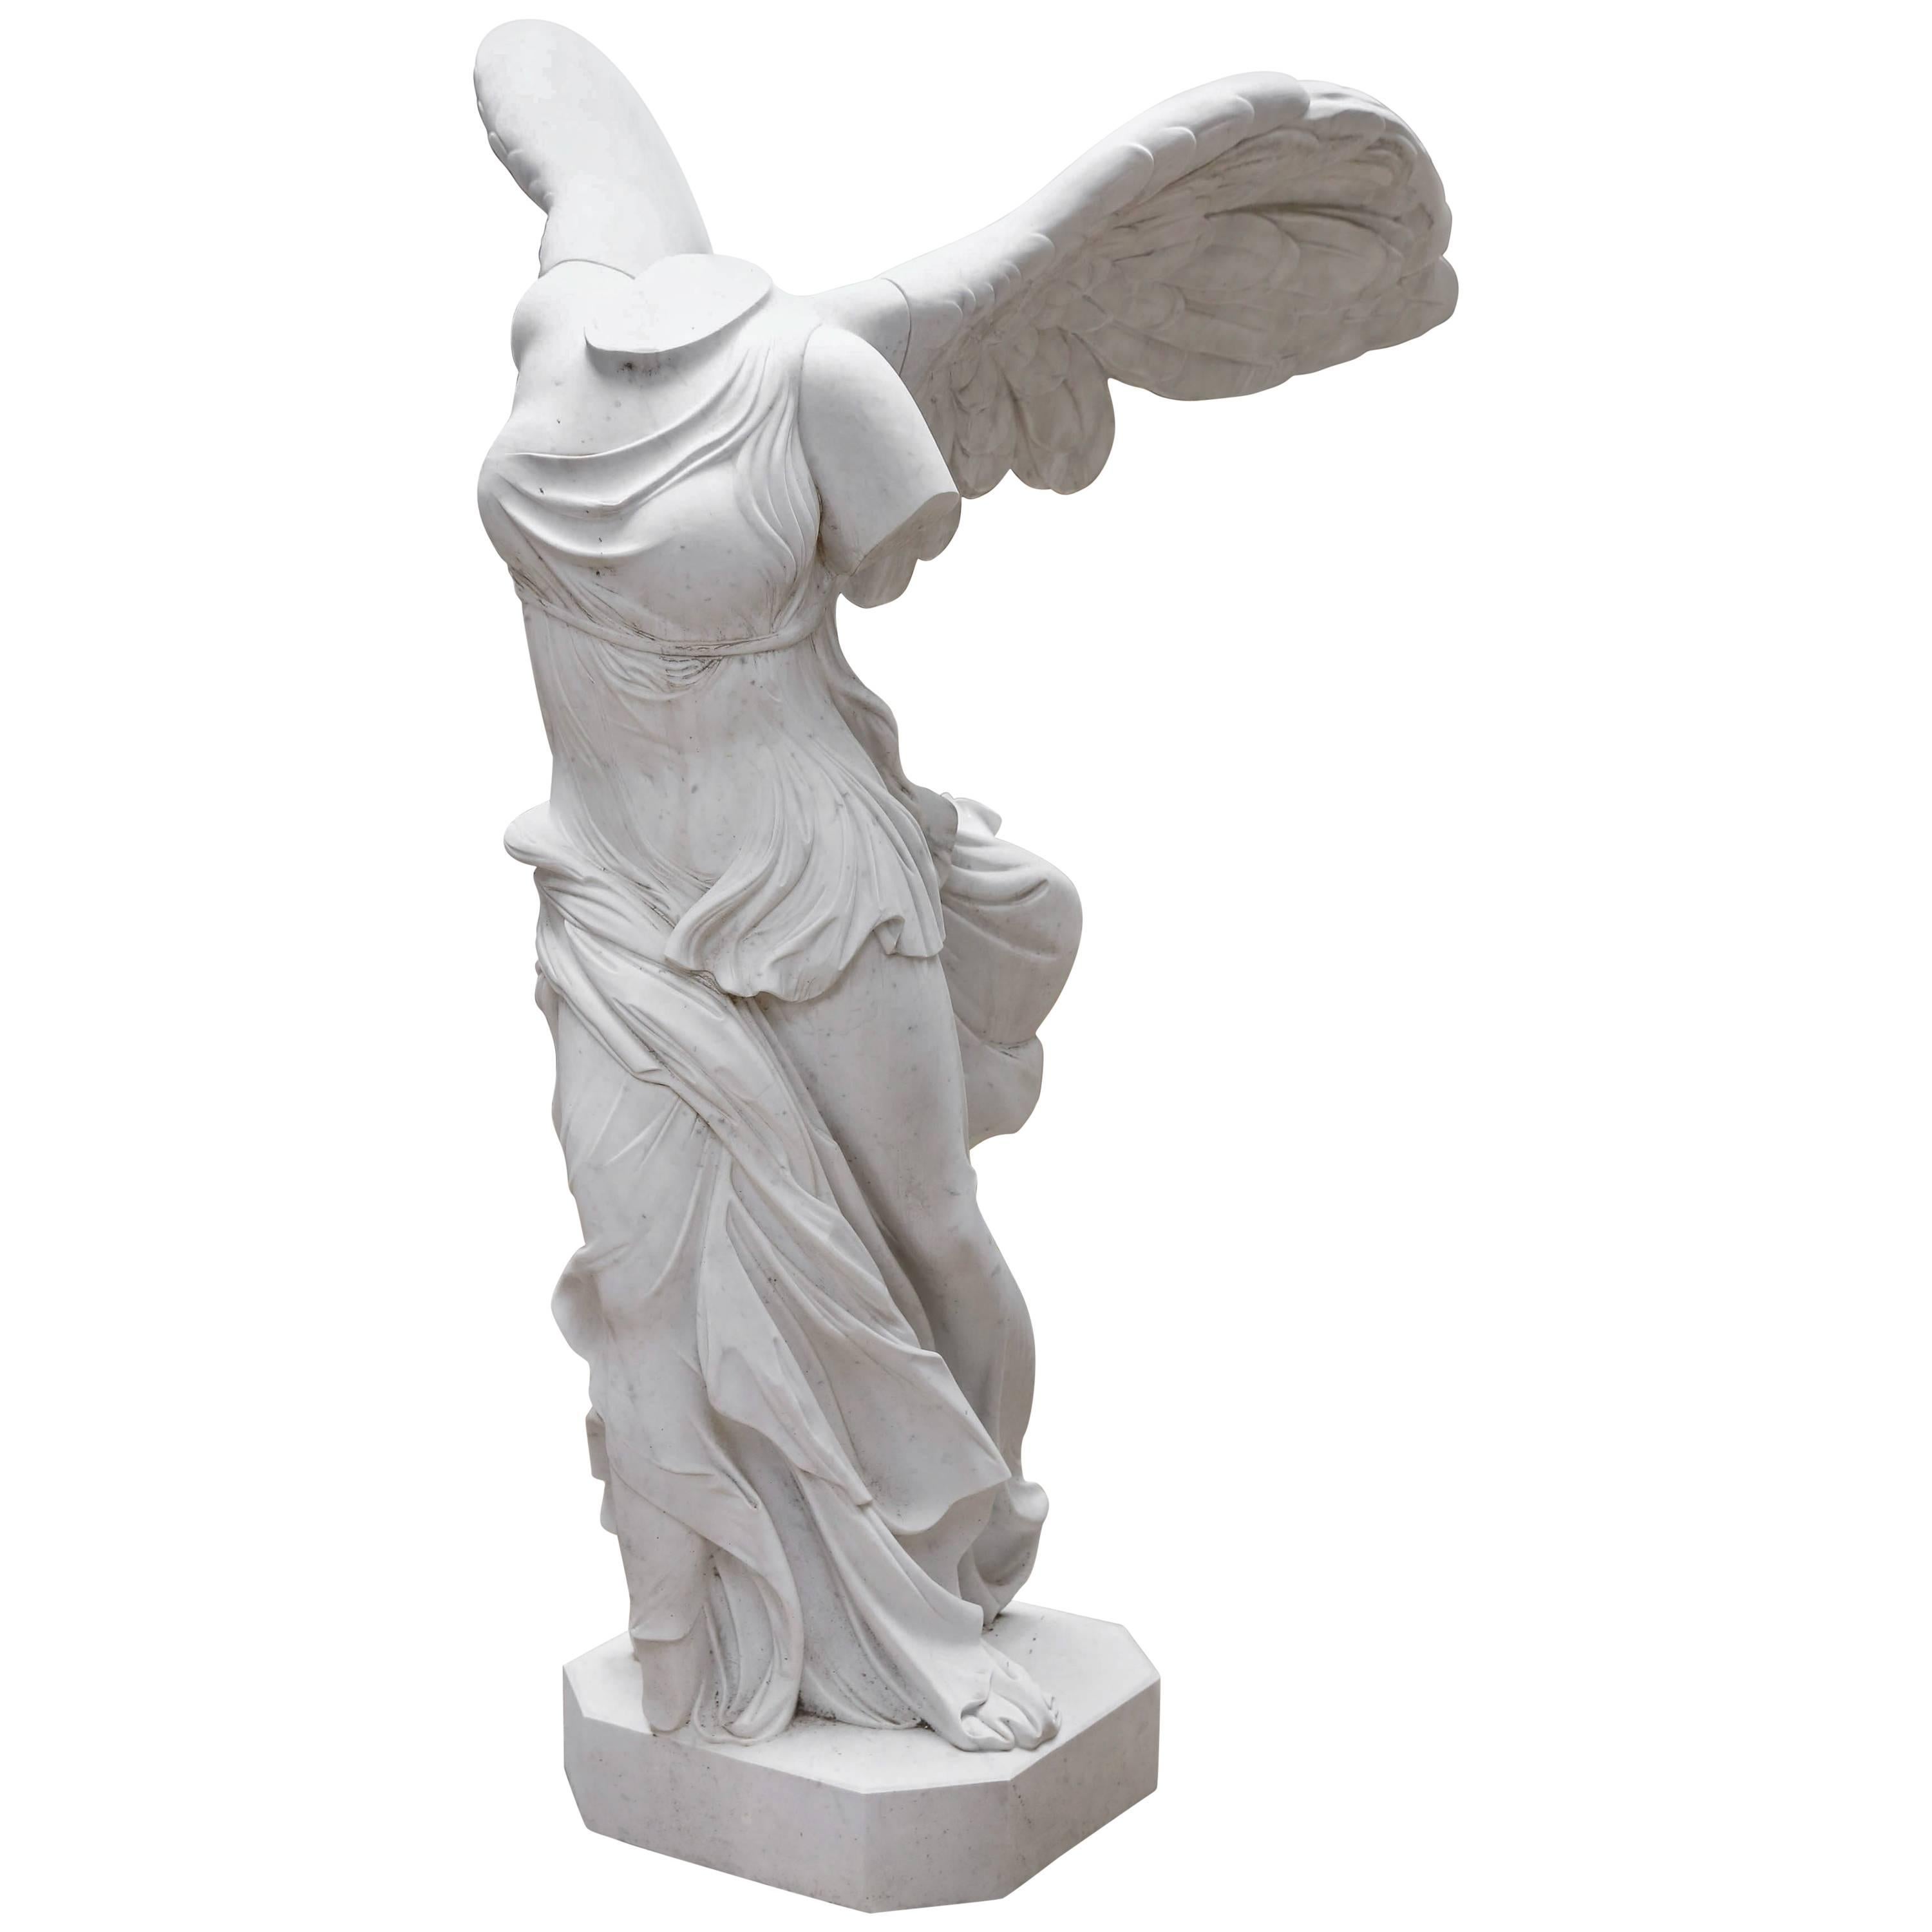 Lifesize Hand-carved White Carrara Marble Statue of Winged Victory, 20th Century